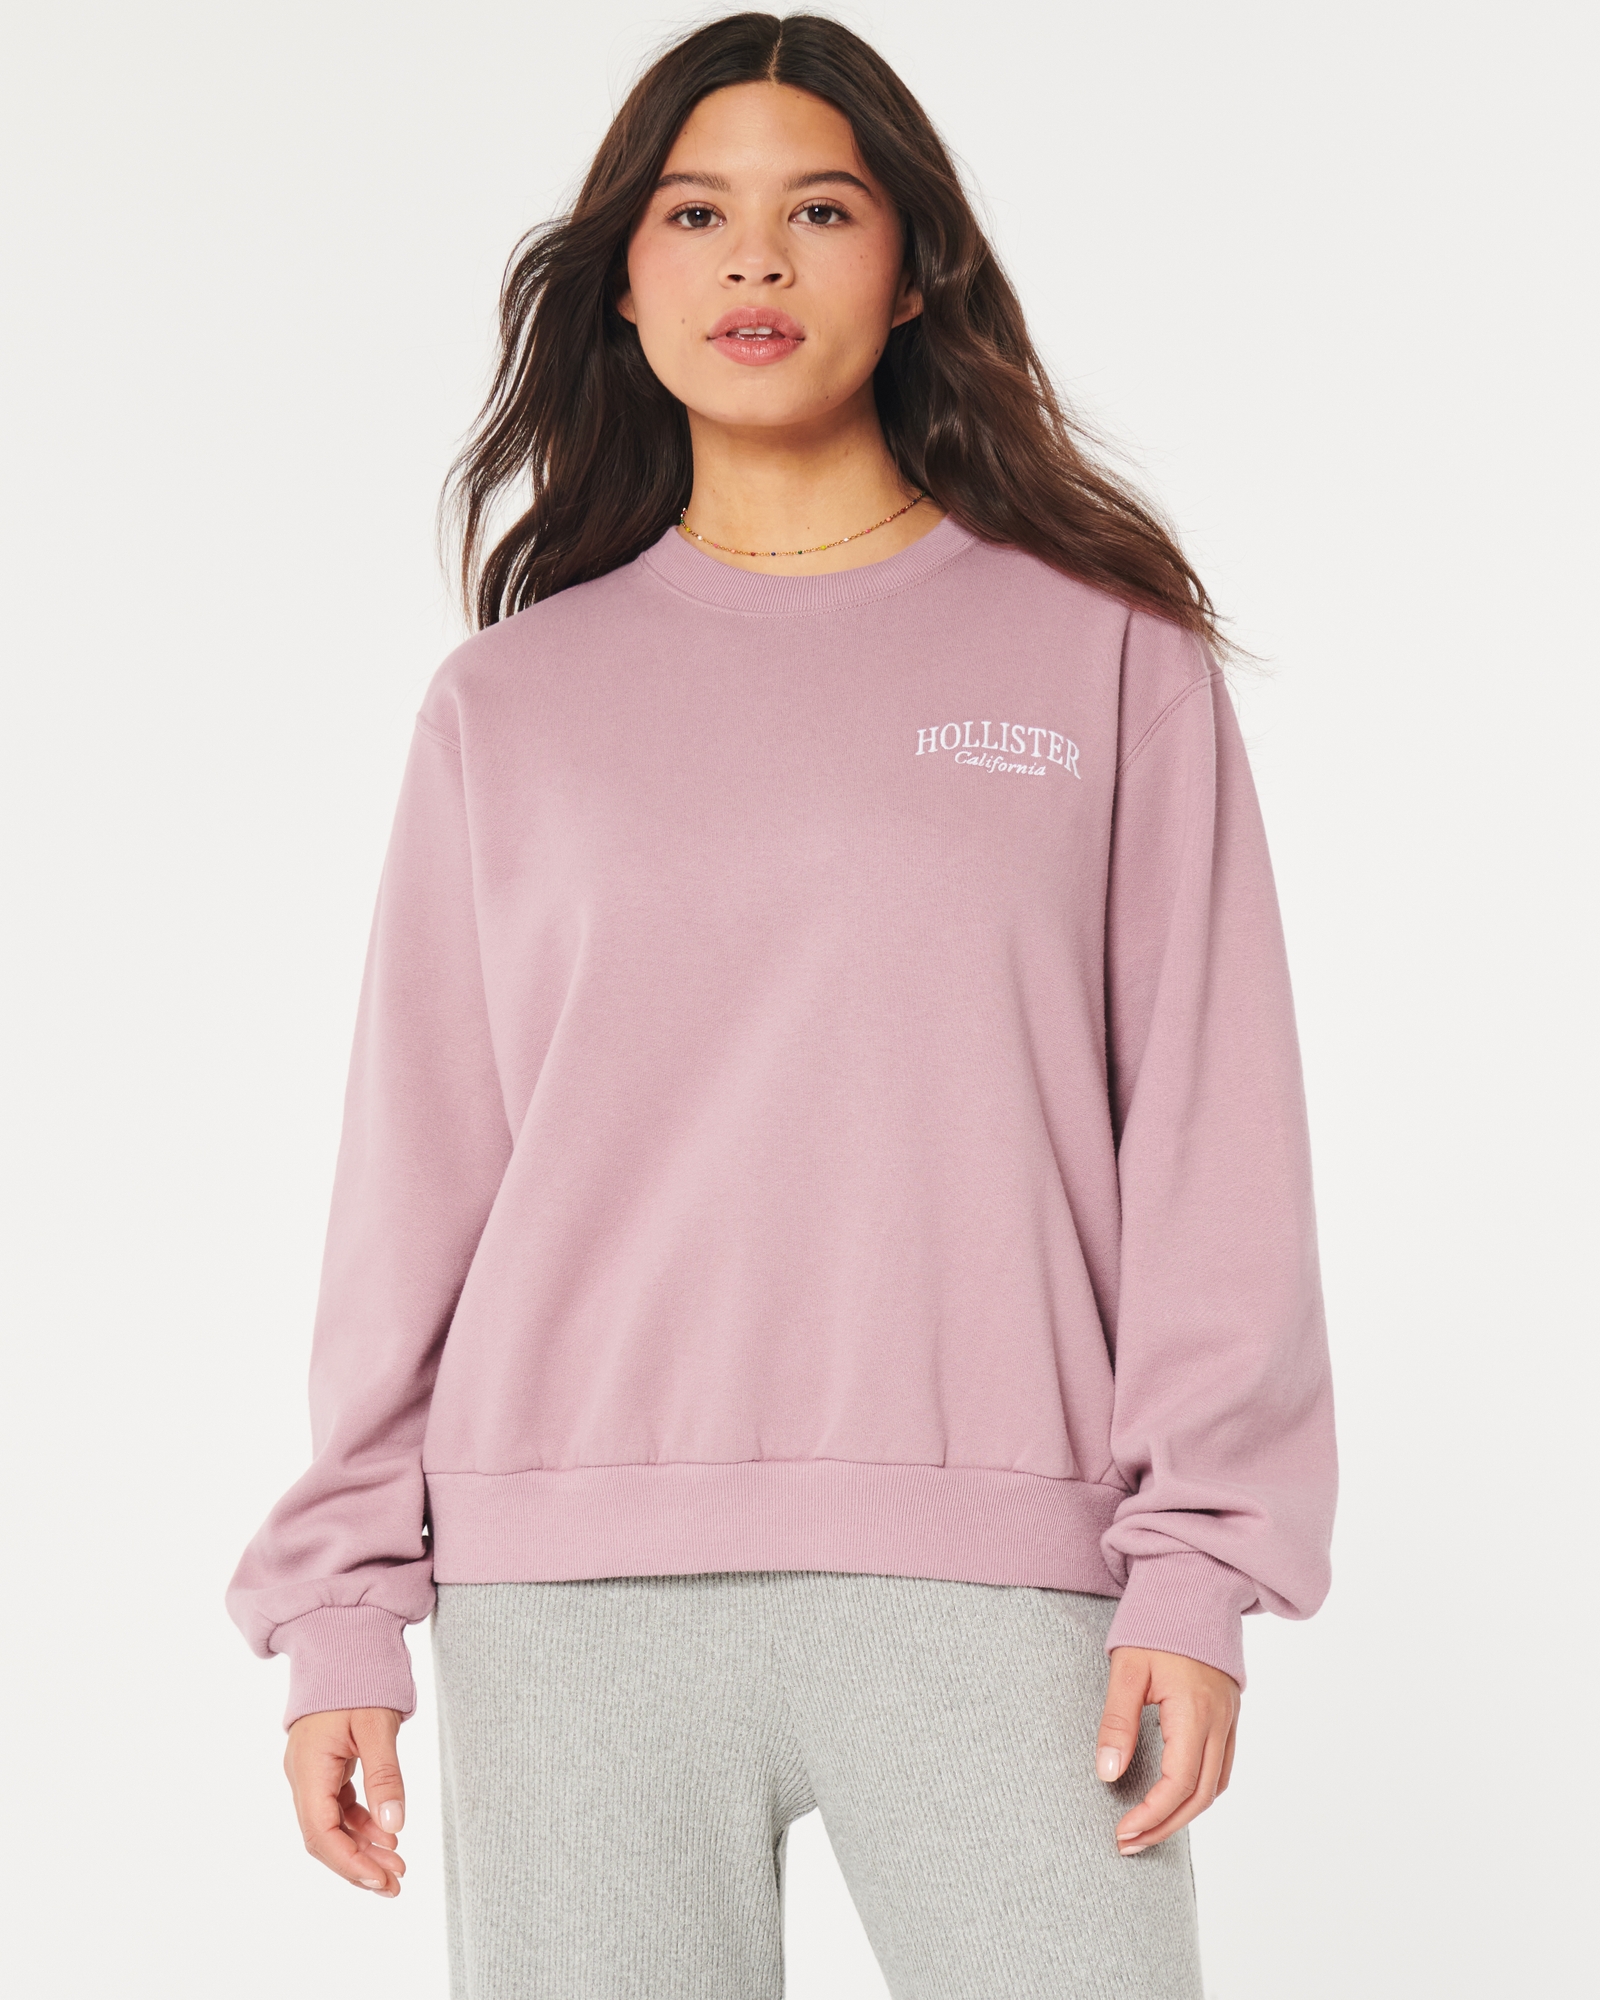 https://img.hollisterco.com/is/image/anf/KIC_352-3175-0034-610_model1.jpg?policy=product-extra-large